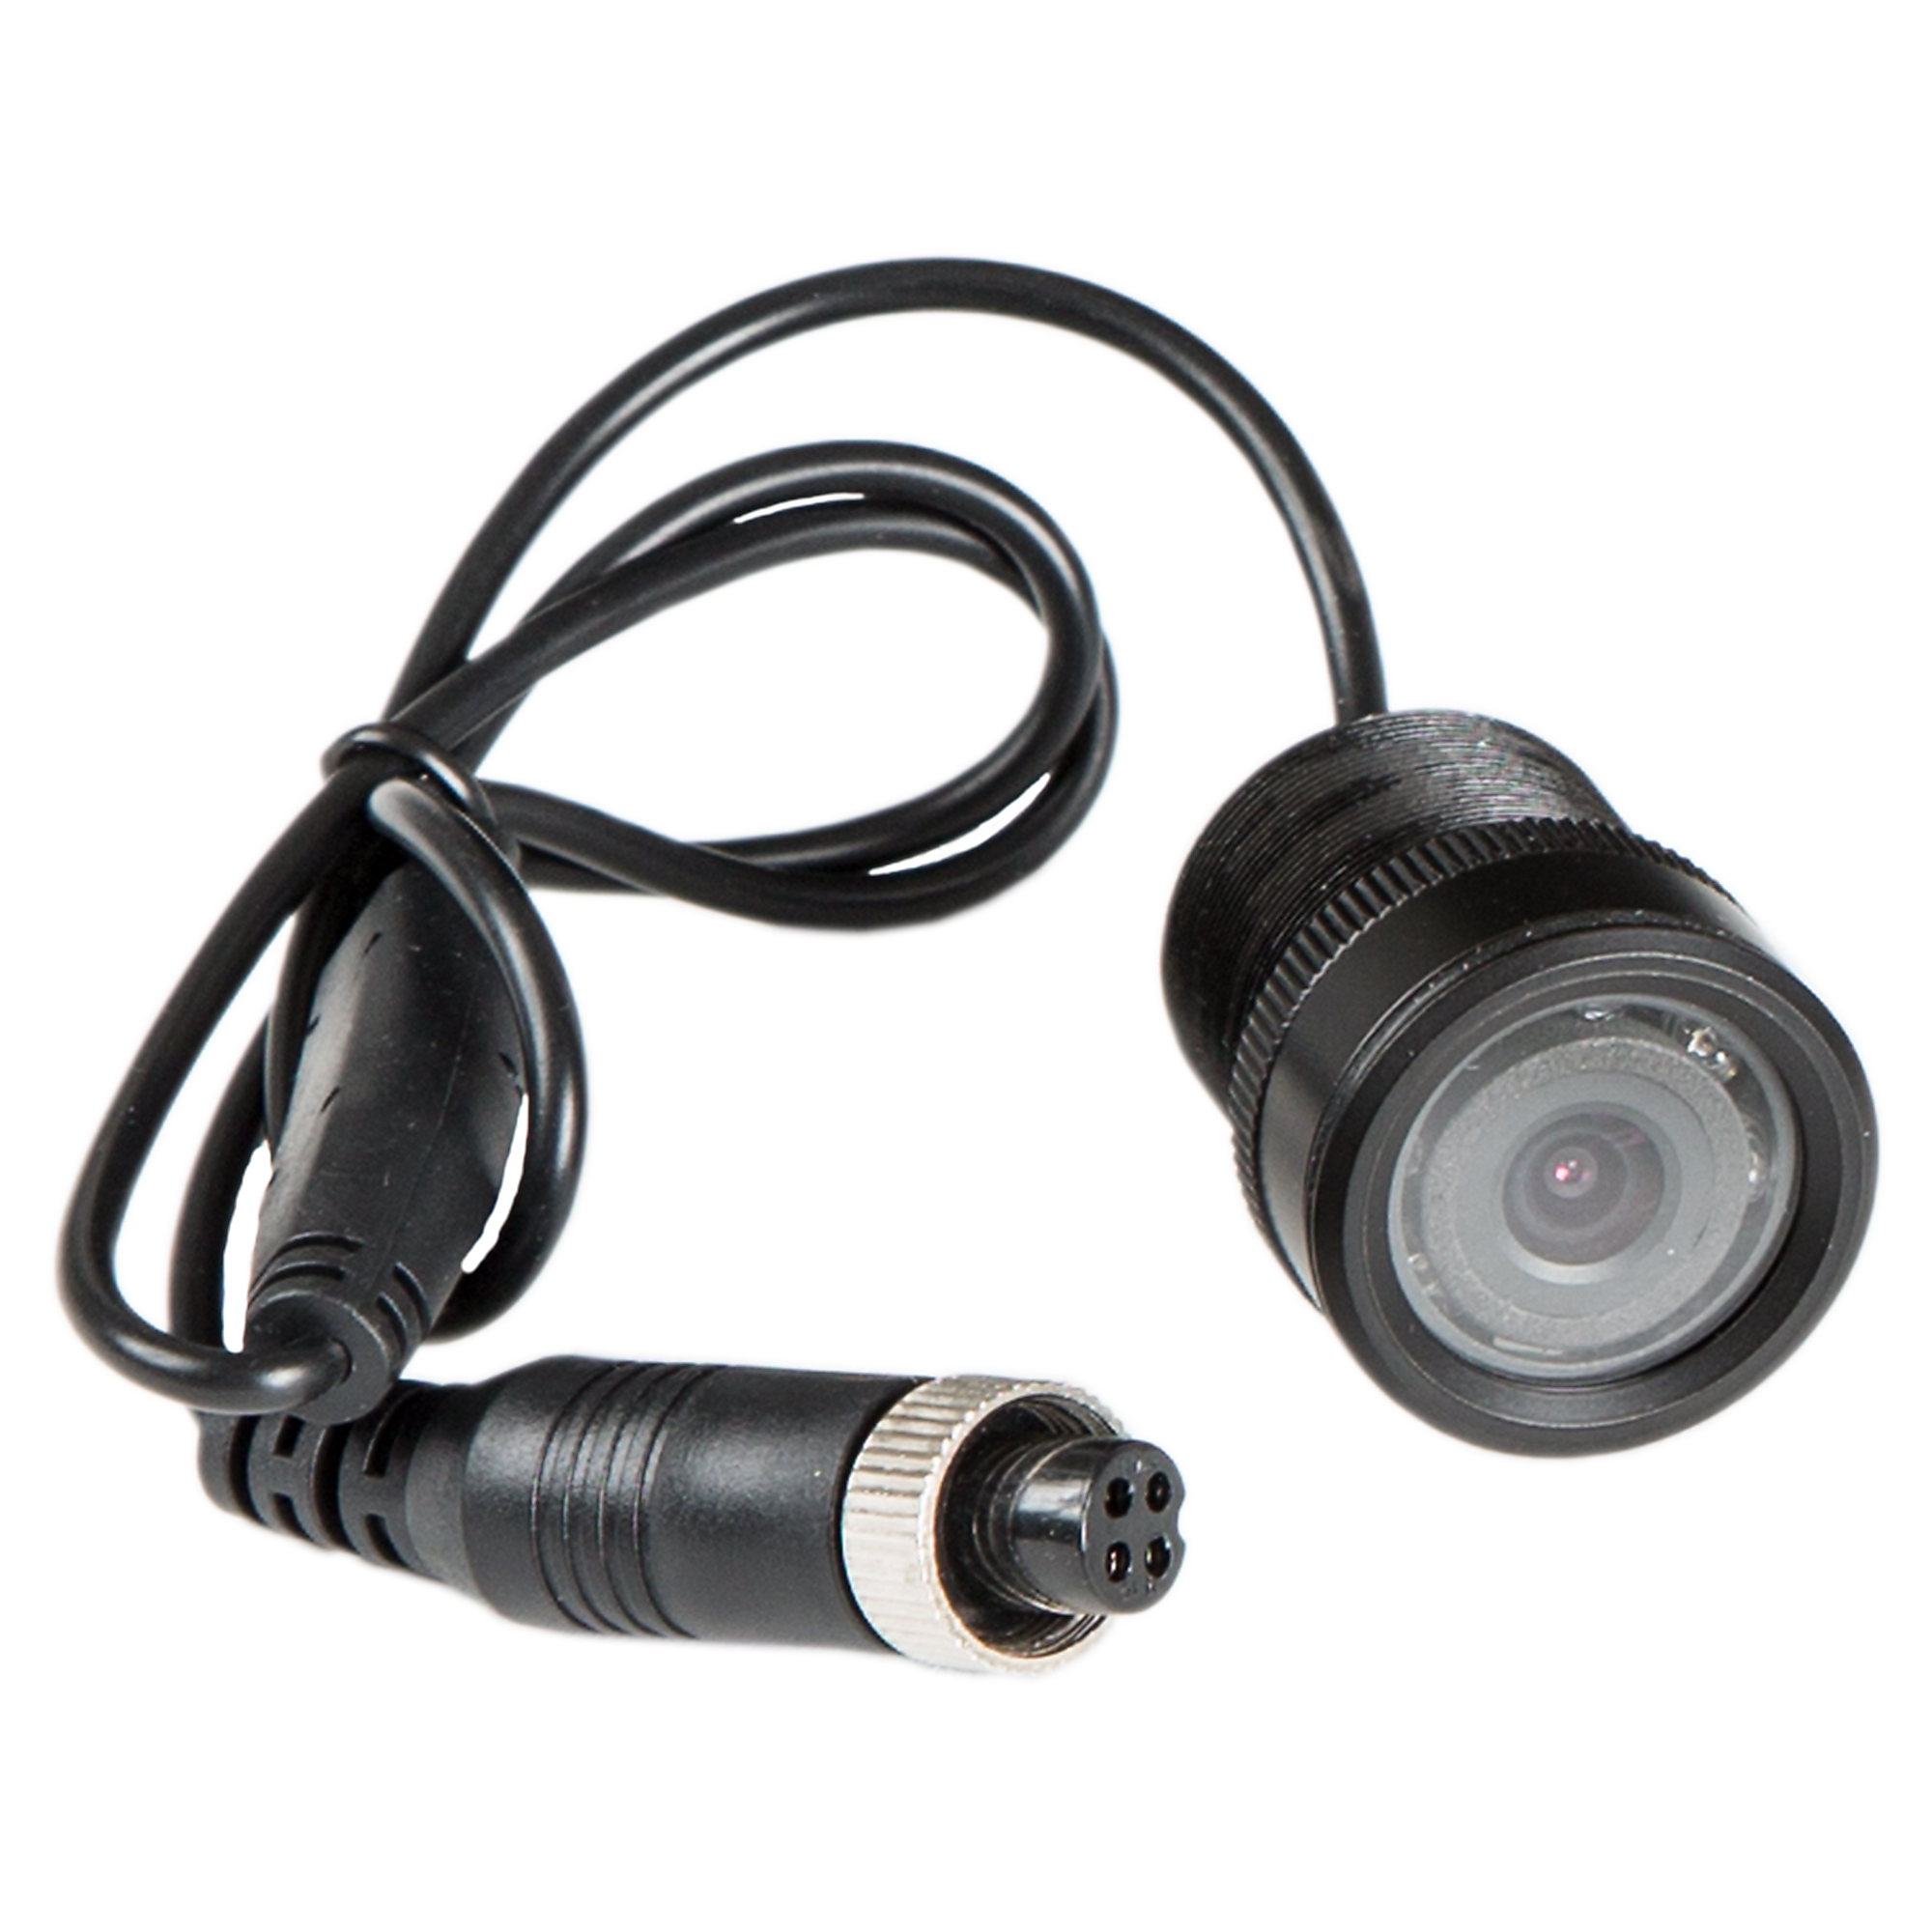 Buyers Products Bullet-Shaped Camera for Recessed Mounting w/ Night Vision, Model 8883103